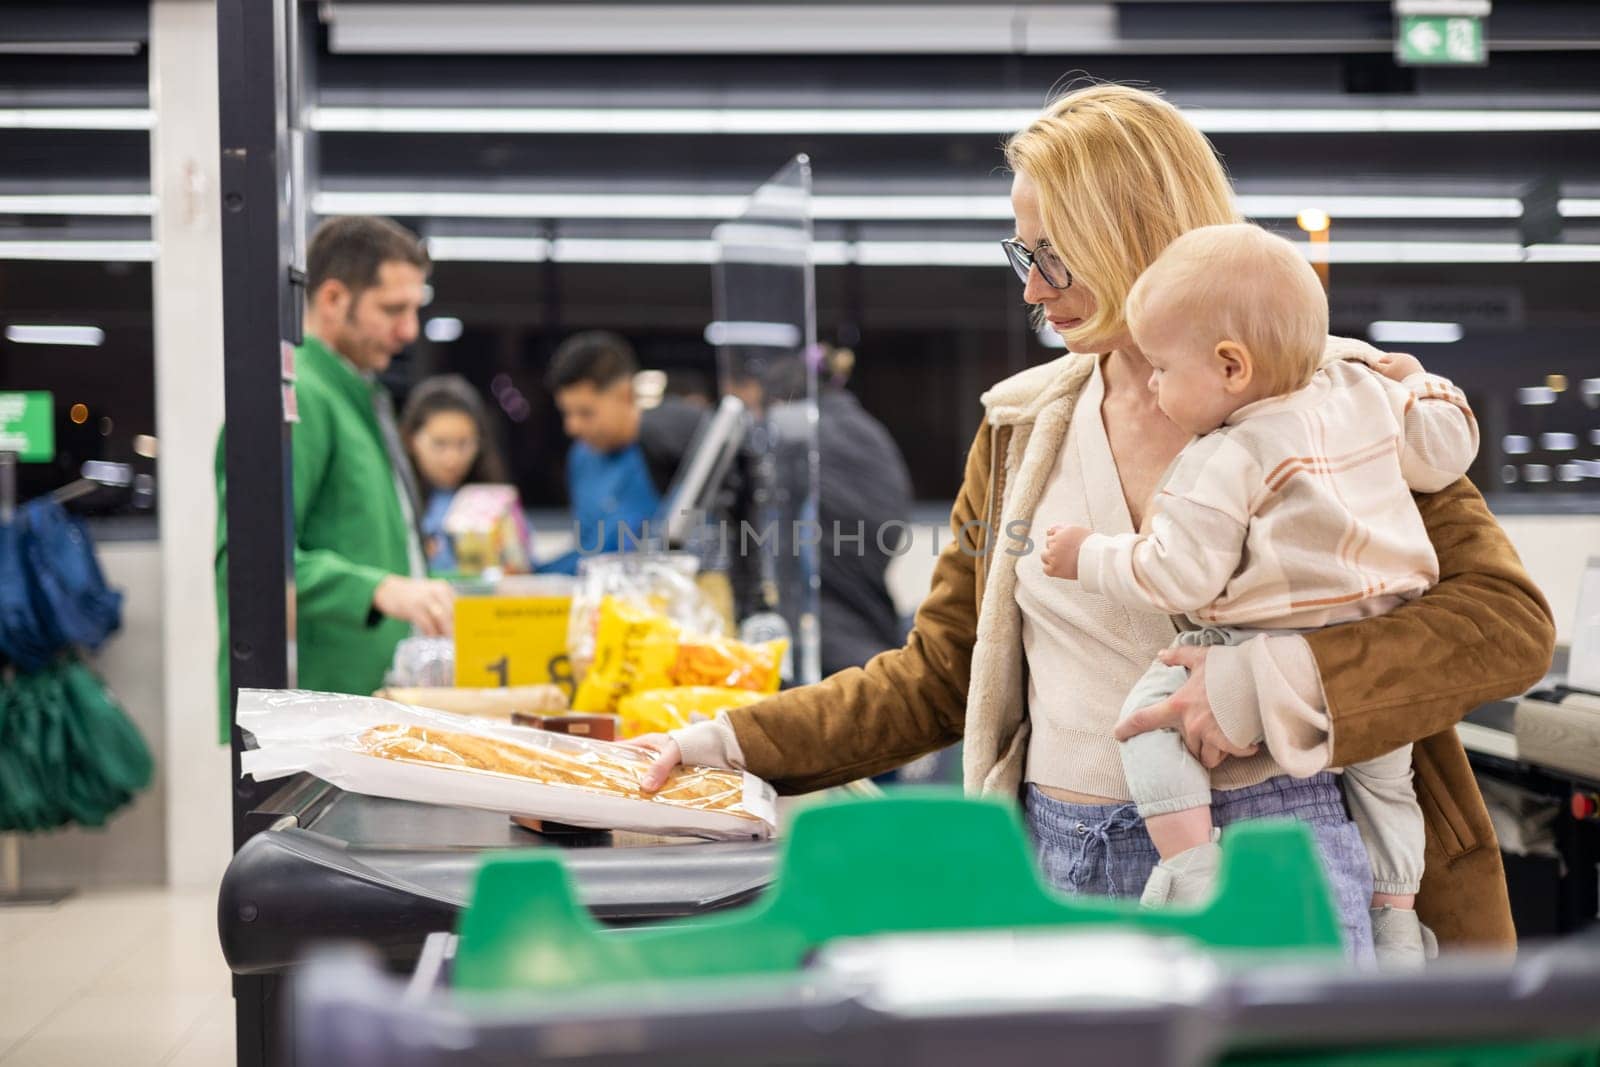 Mother shopping with her infant baby boy, holding the child while stacking products at the cash register in supermarket grocery store